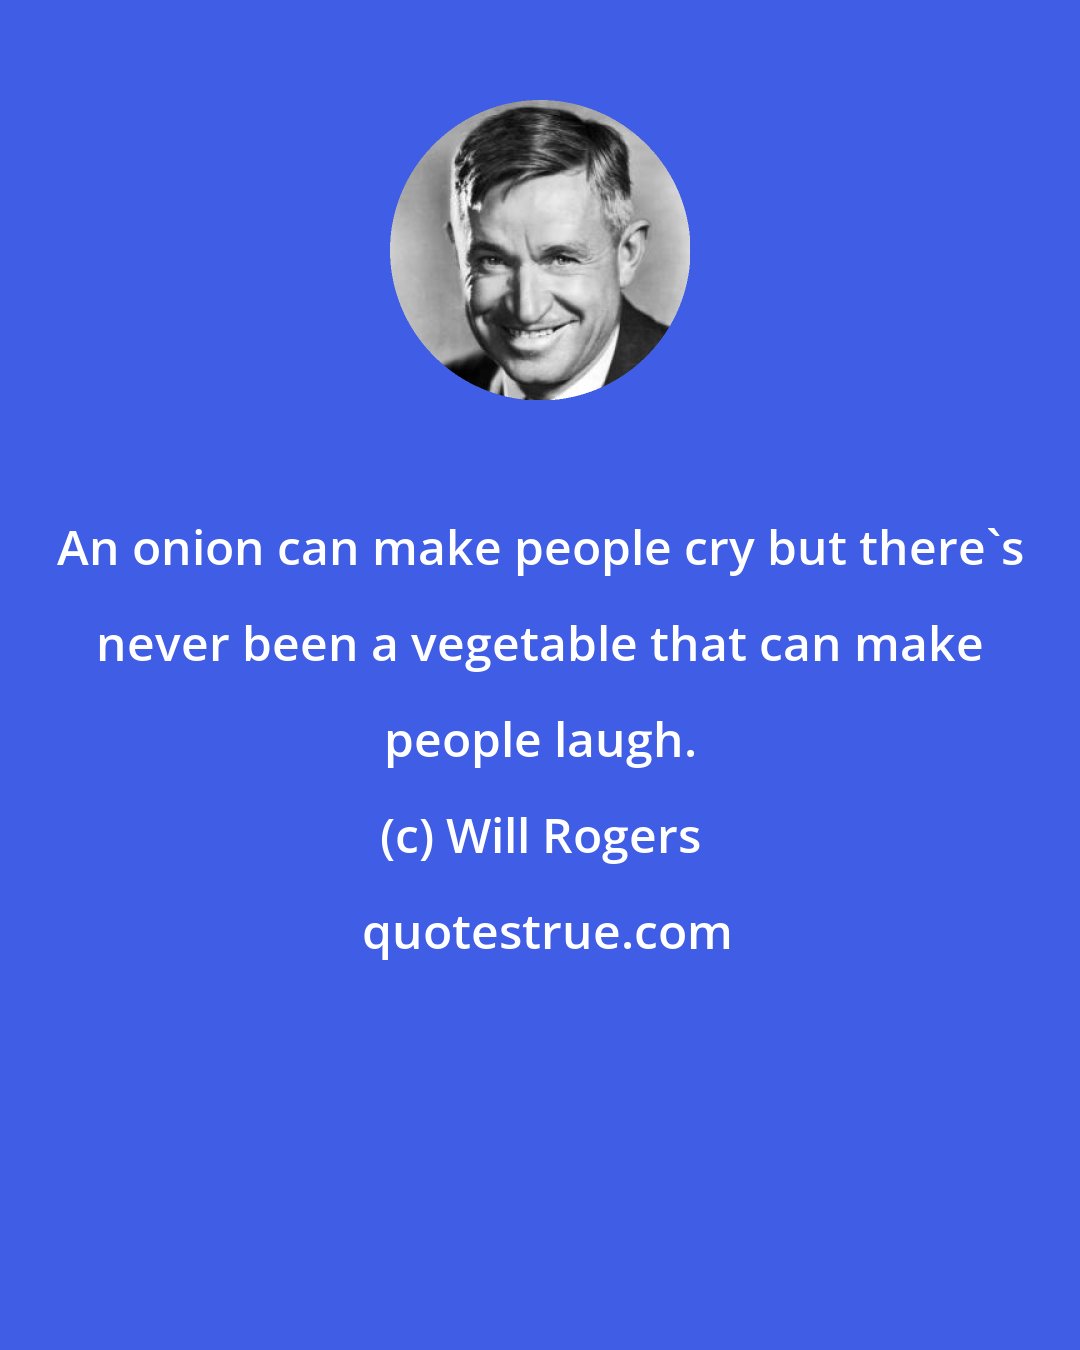 Will Rogers: An onion can make people cry but there's never been a vegetable that can make people laugh.